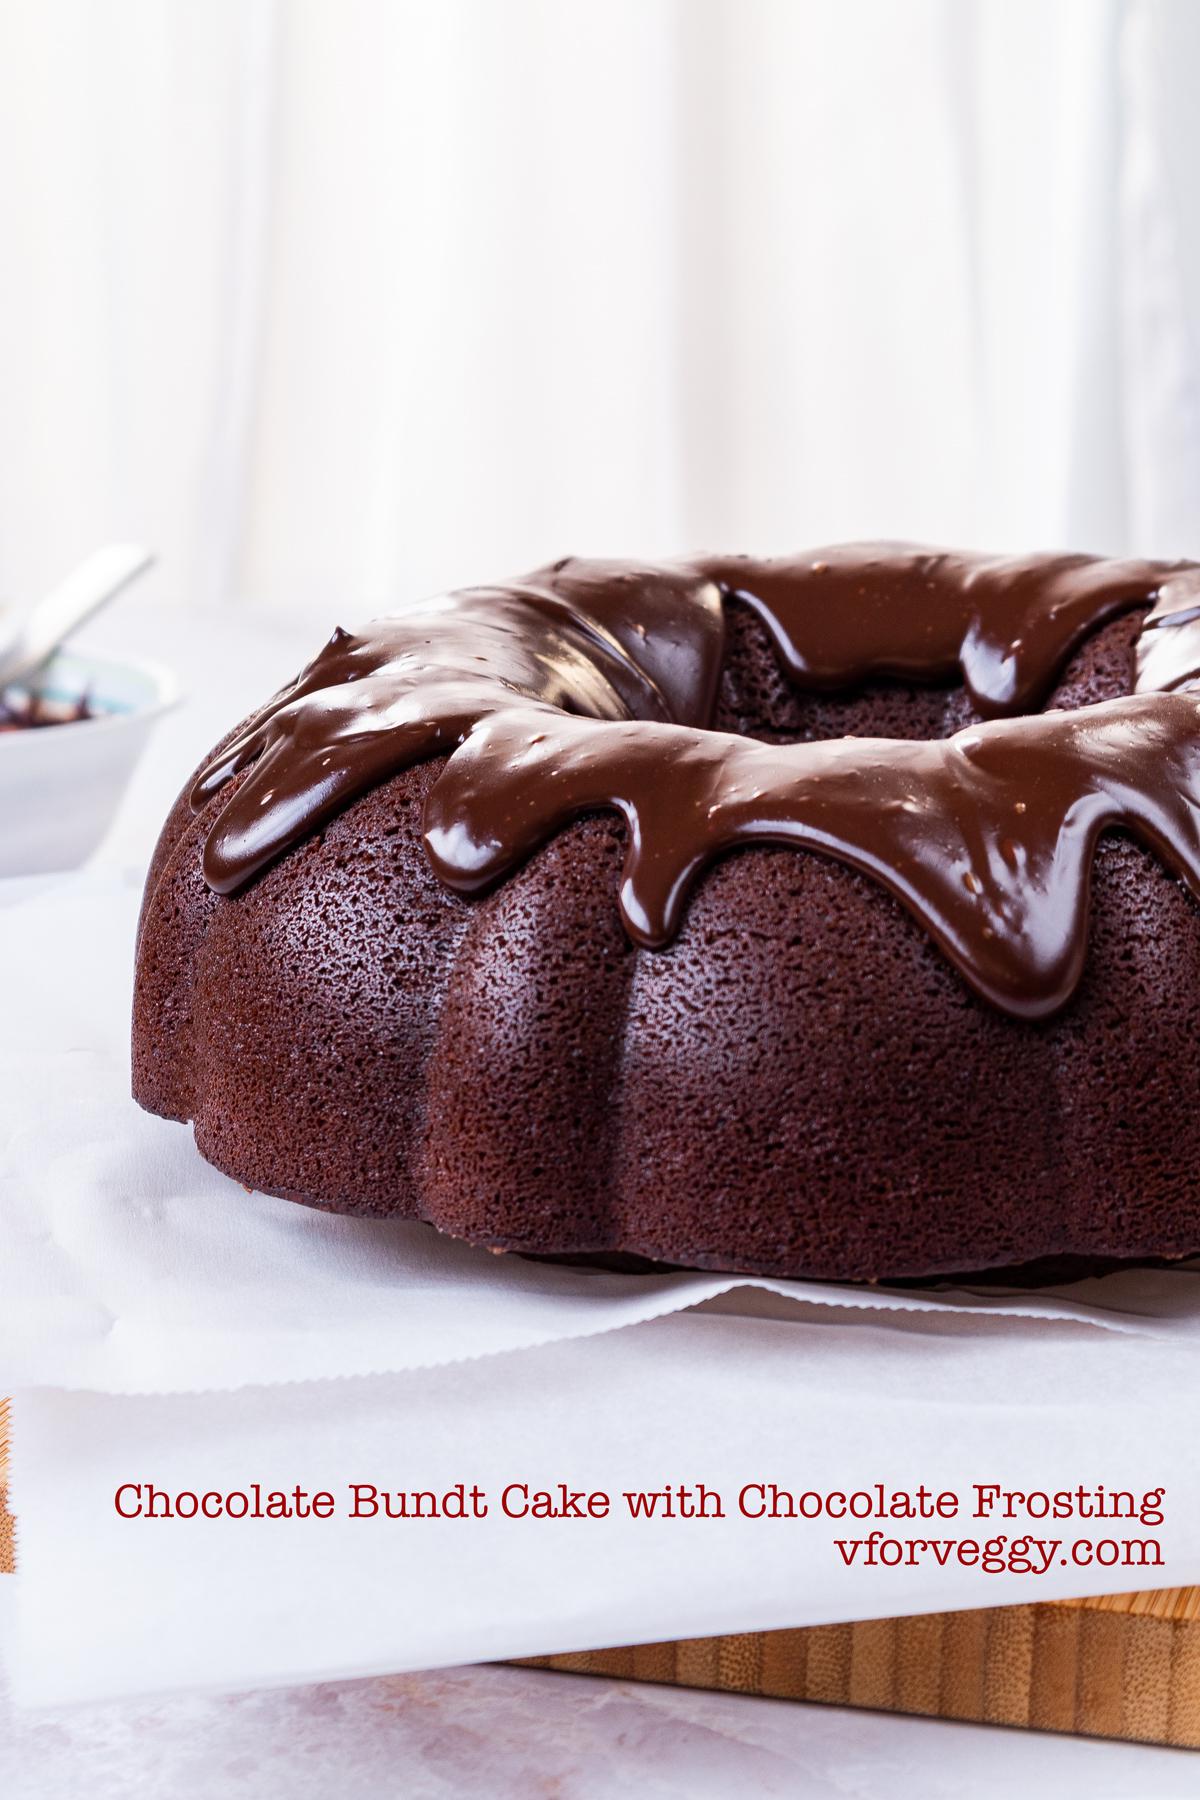 Chocolate Bundt Cake with Chocolate Frosting.